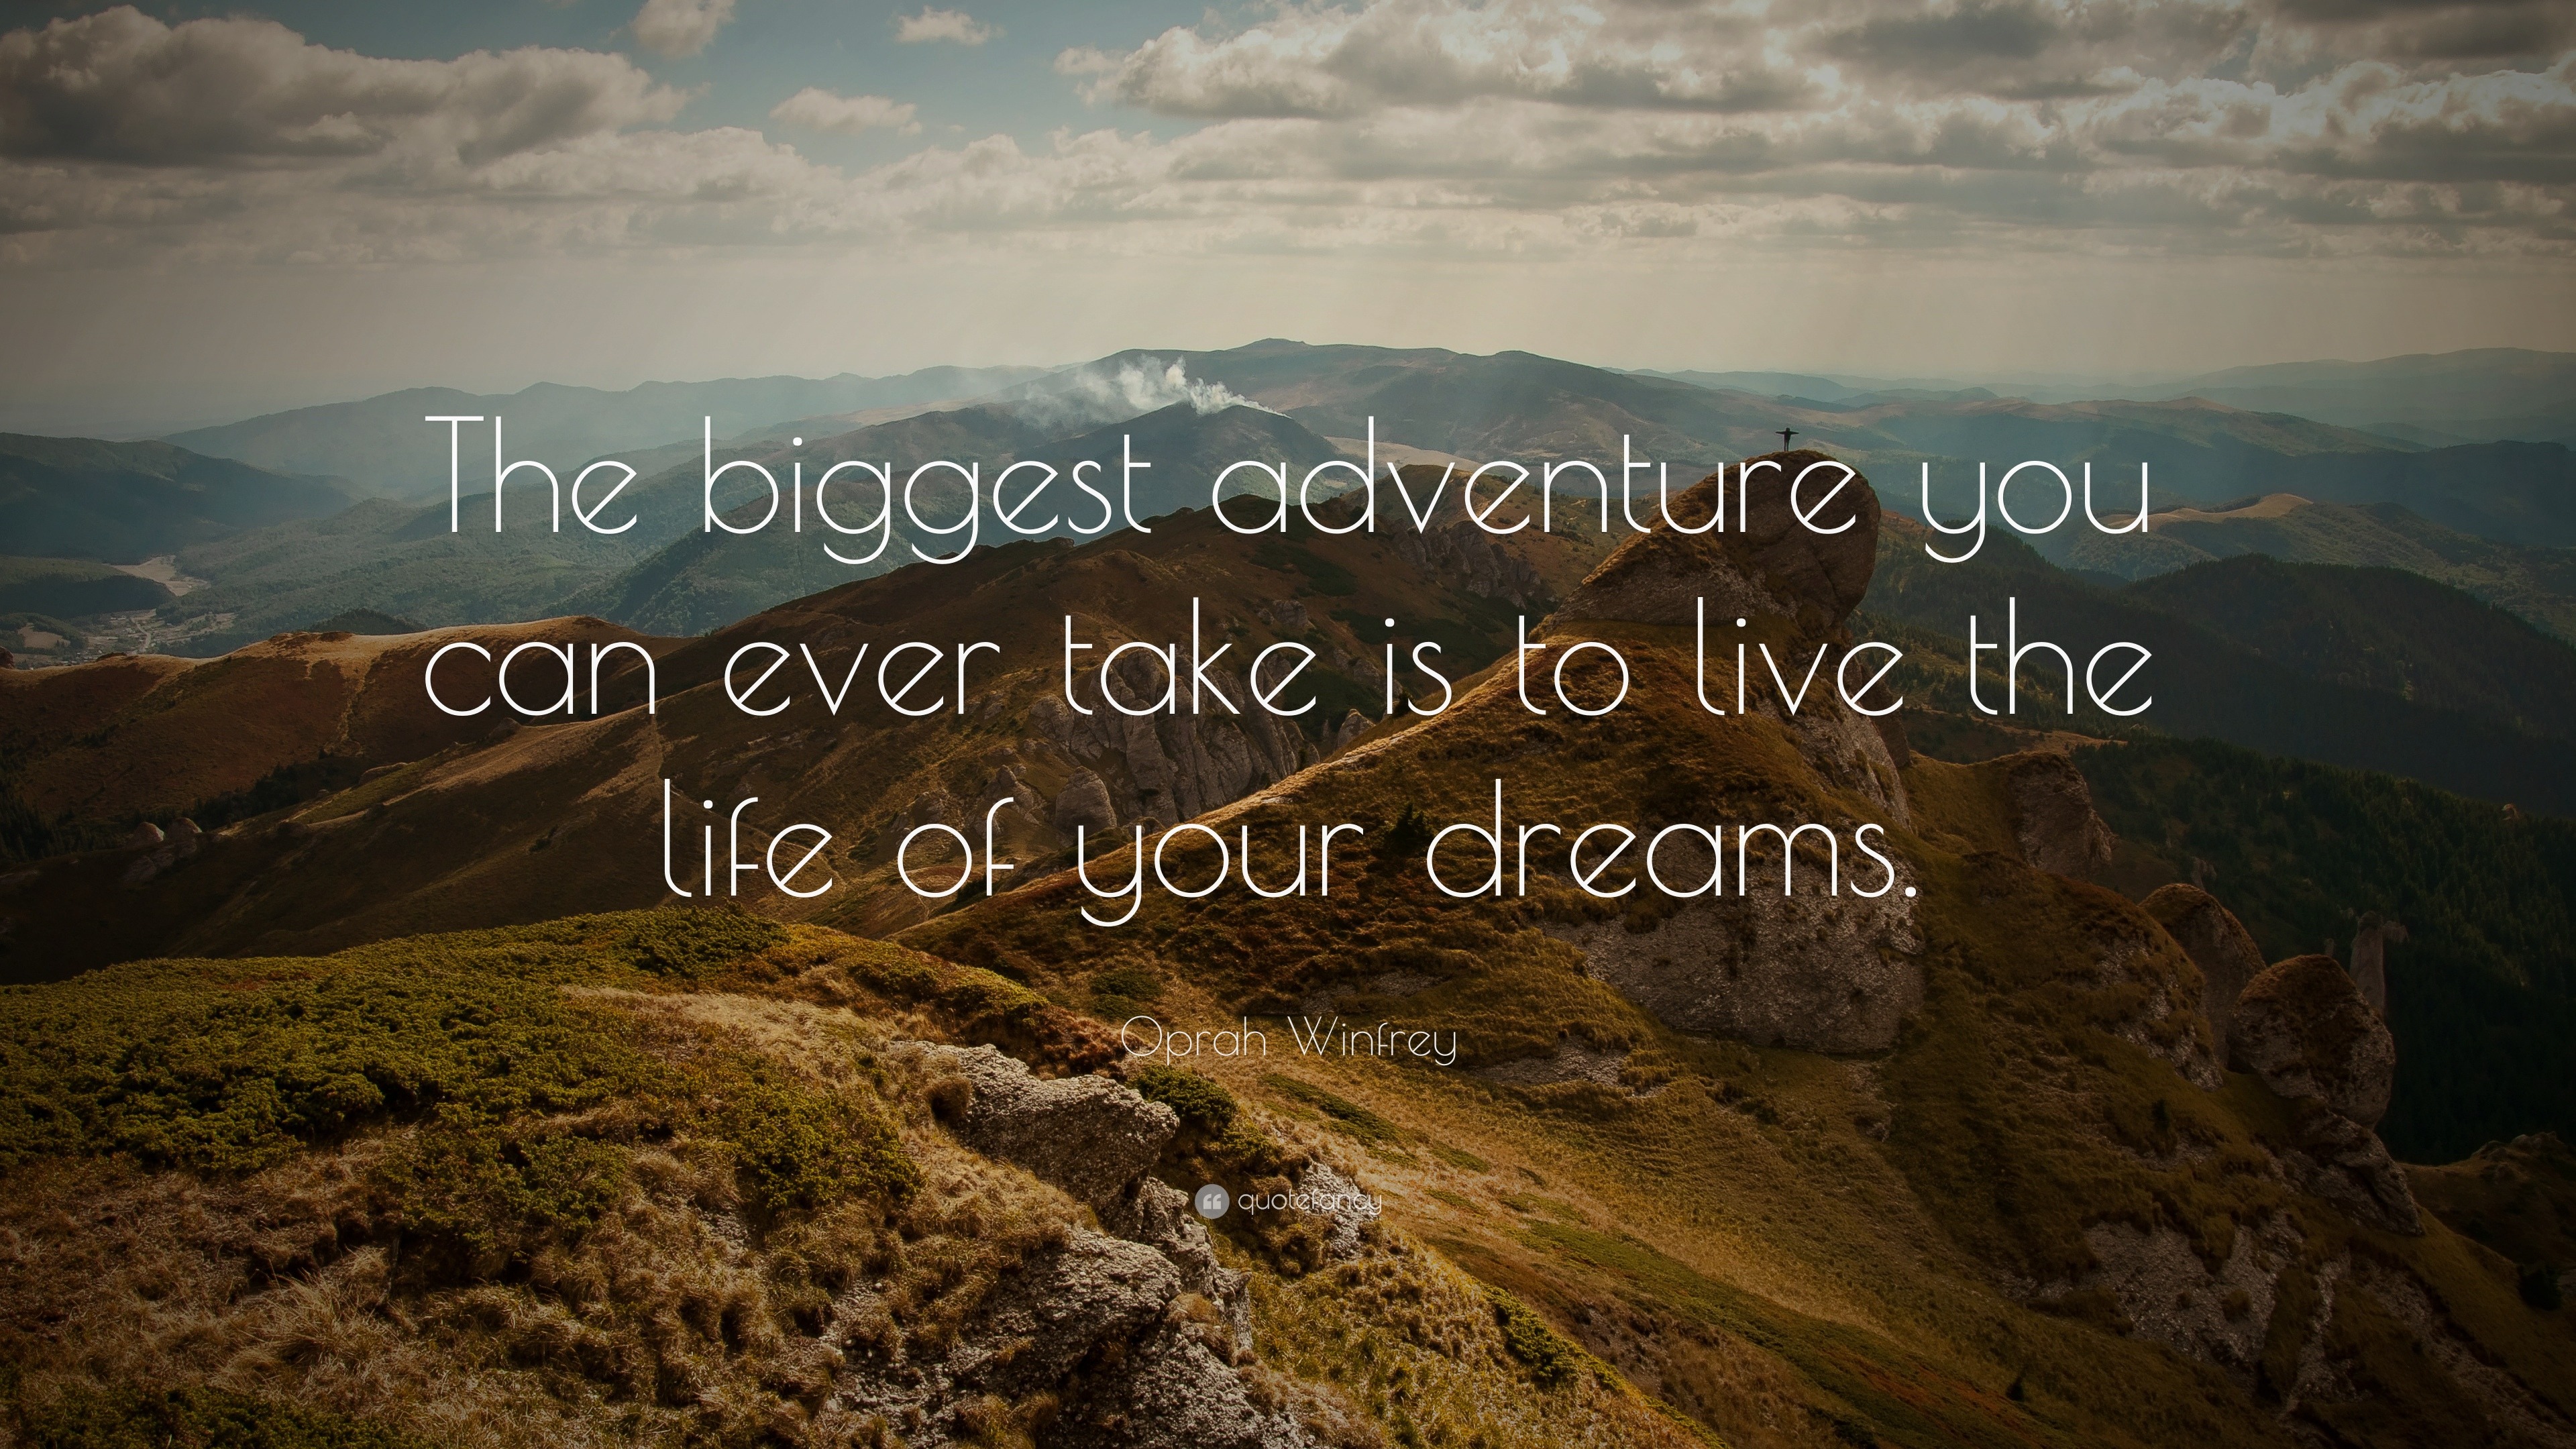 The biggest adventure you can take is to live the life of your